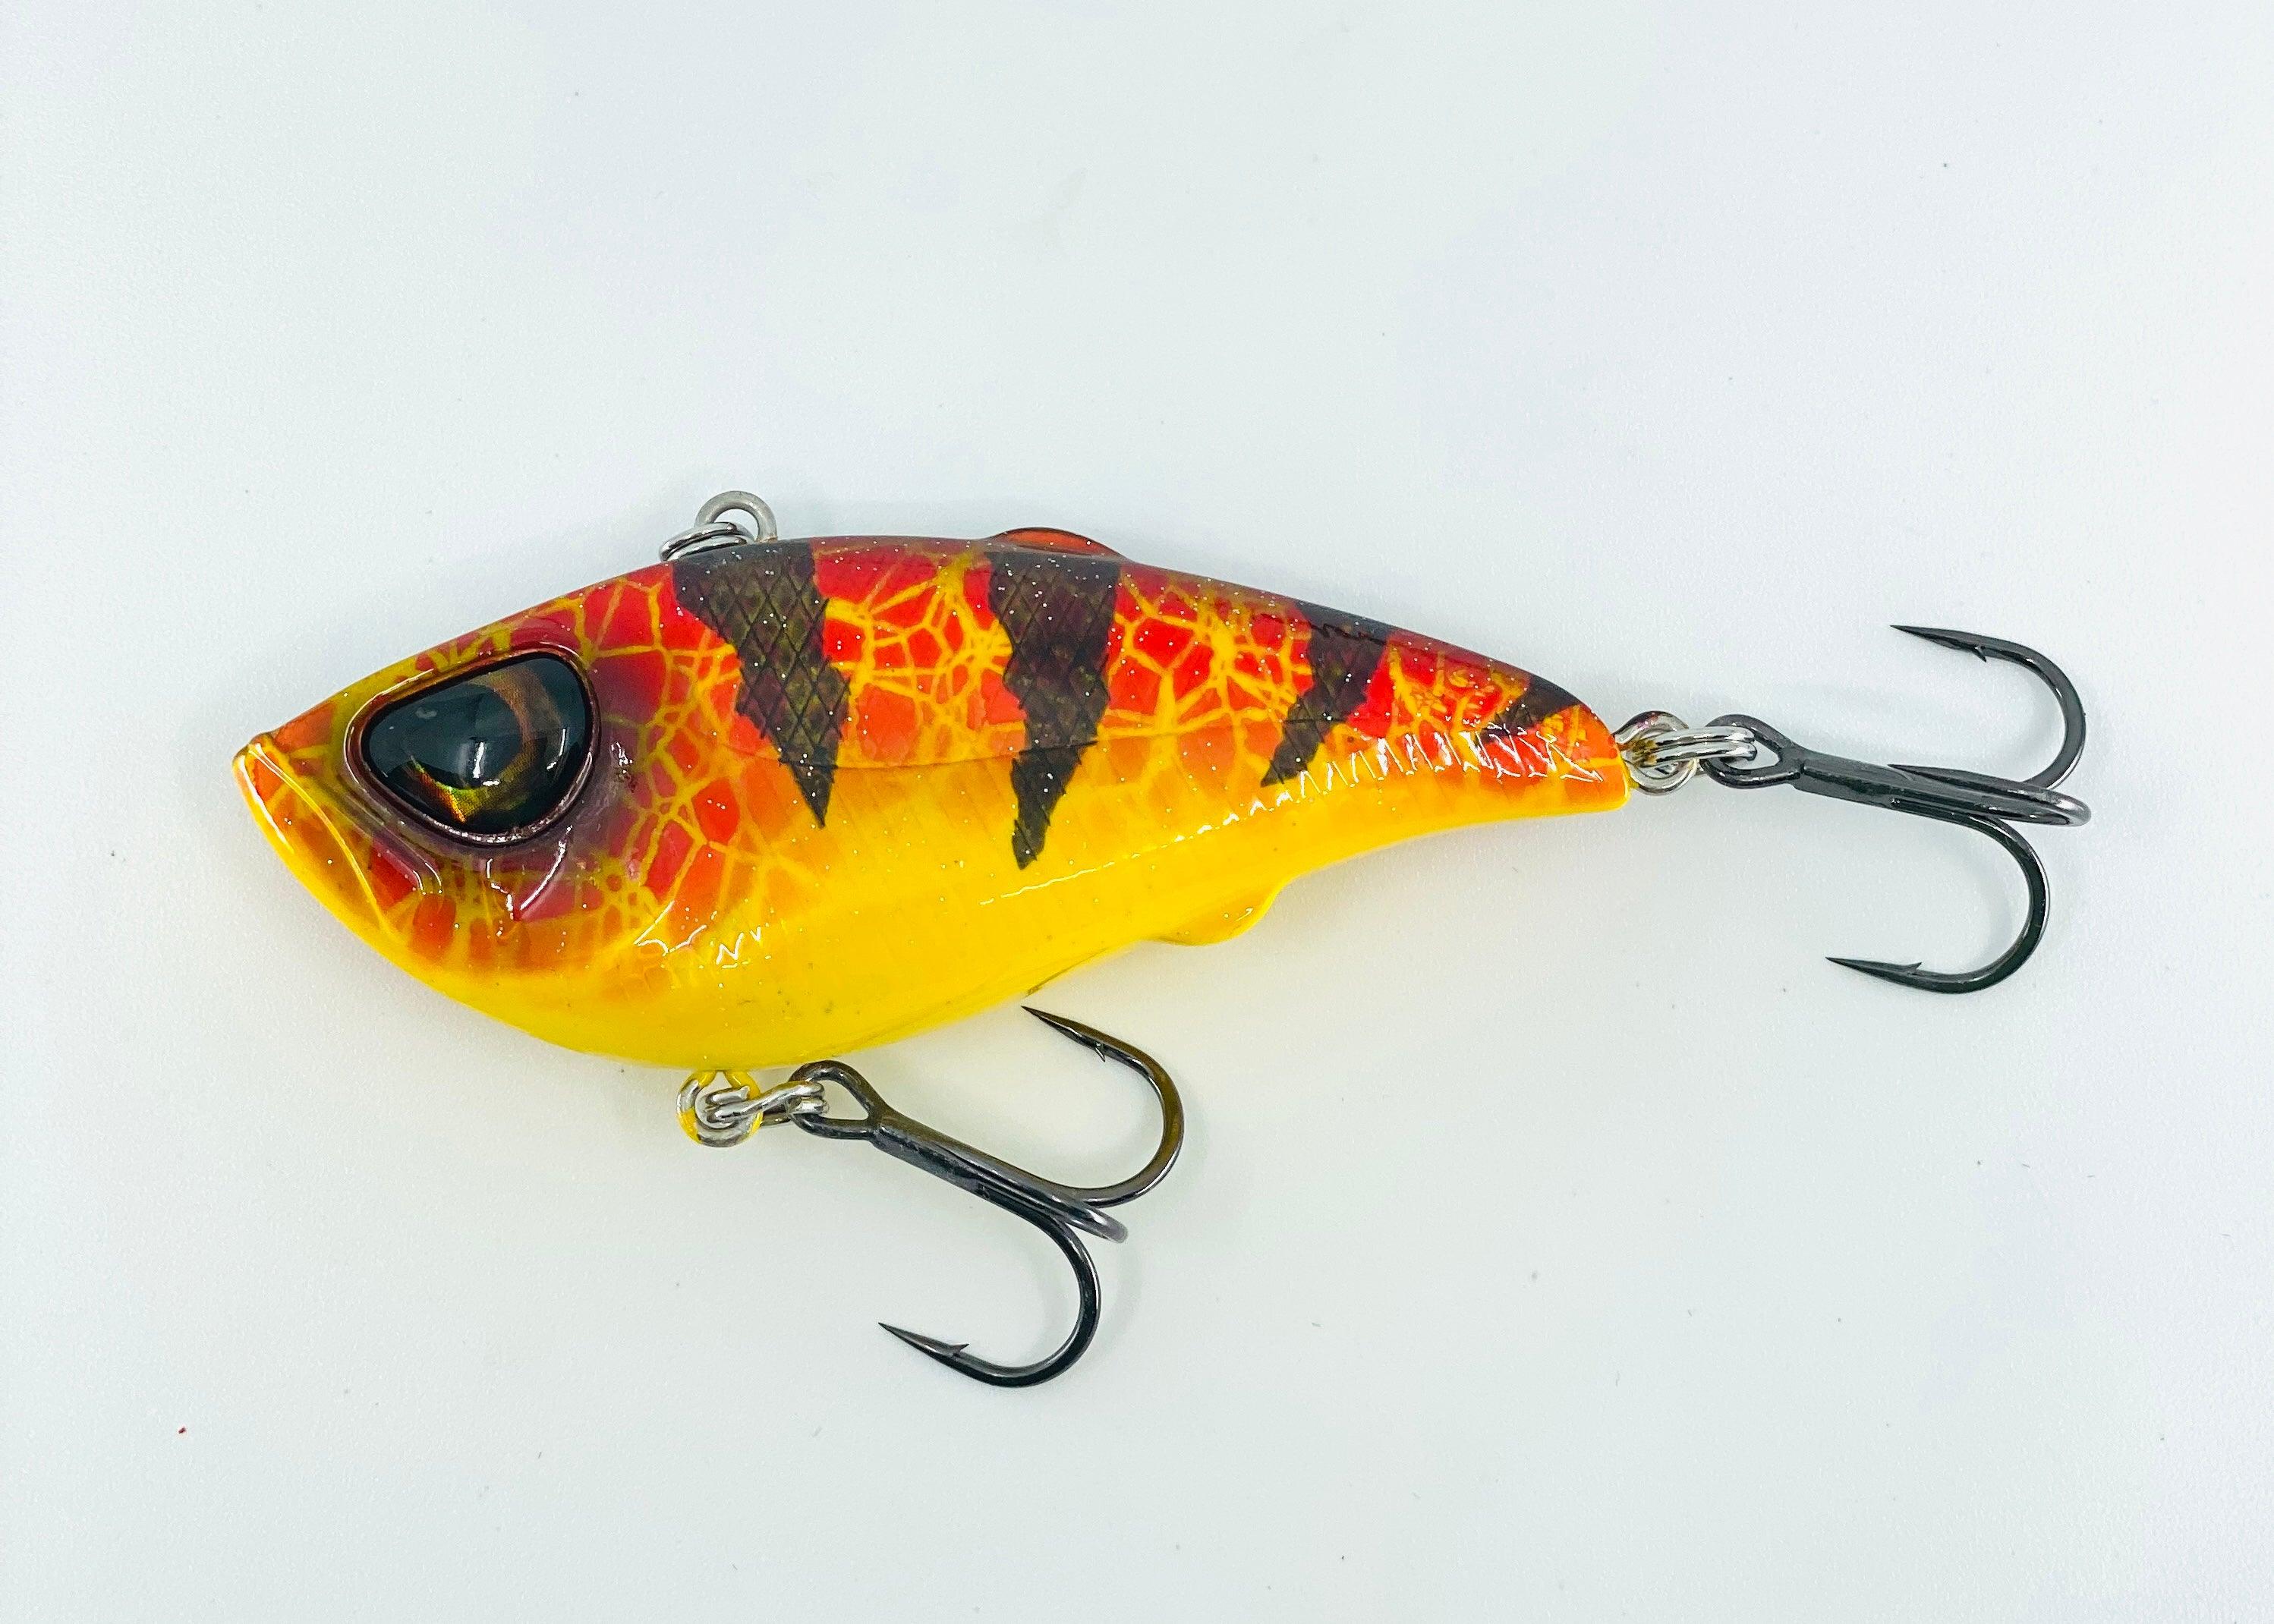 Crankbait for Bass Fishing 60mm/2.36 Inches Shallow Diving Crank Bait Square Bill Cranking Fishing Lures